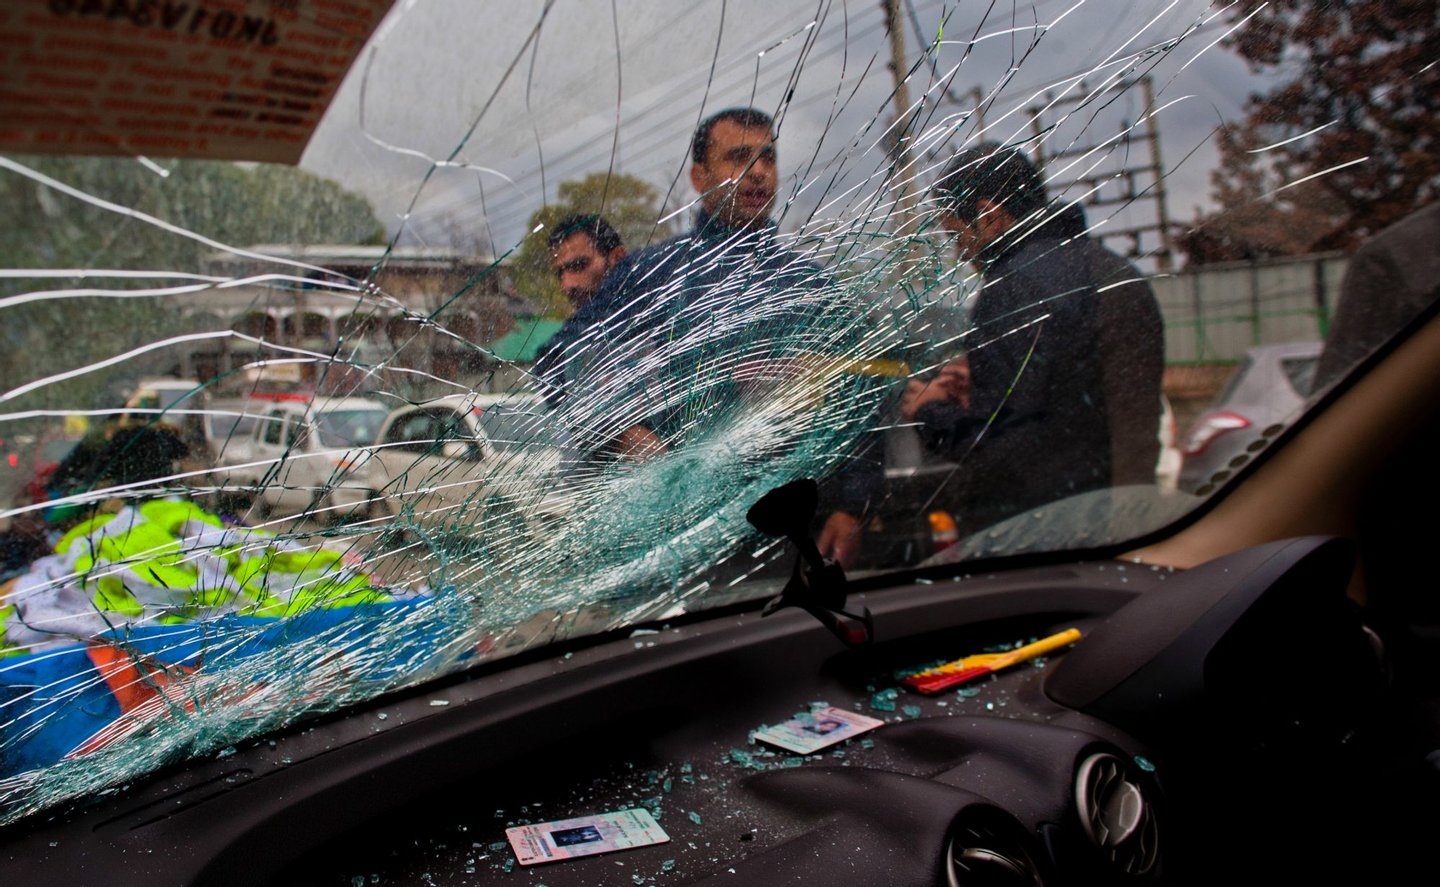 SRINAGAR - INDIA, OCTOBER 26: A damaged car hit by a tree branch is seen after a powerful earthquake struck northern Afghanistan, with tremors felt as widely as Pakistan and northern India on October 26, 2015 in Srinagar, the summer capital of Indian administered Kashmir, India. The magnitude 7.5 quake was centred in the mountainous Hindu Kush region, 45km (28 miles) south-west of Jarm, the US Geological Survey reported. Over 12 people have been reportedly killed in Pakistan while in Afghanistan at least 12 schoolgirls have died in a stampede during the evacuation process. (Photo by Yawar Nazir/ Getty Images)